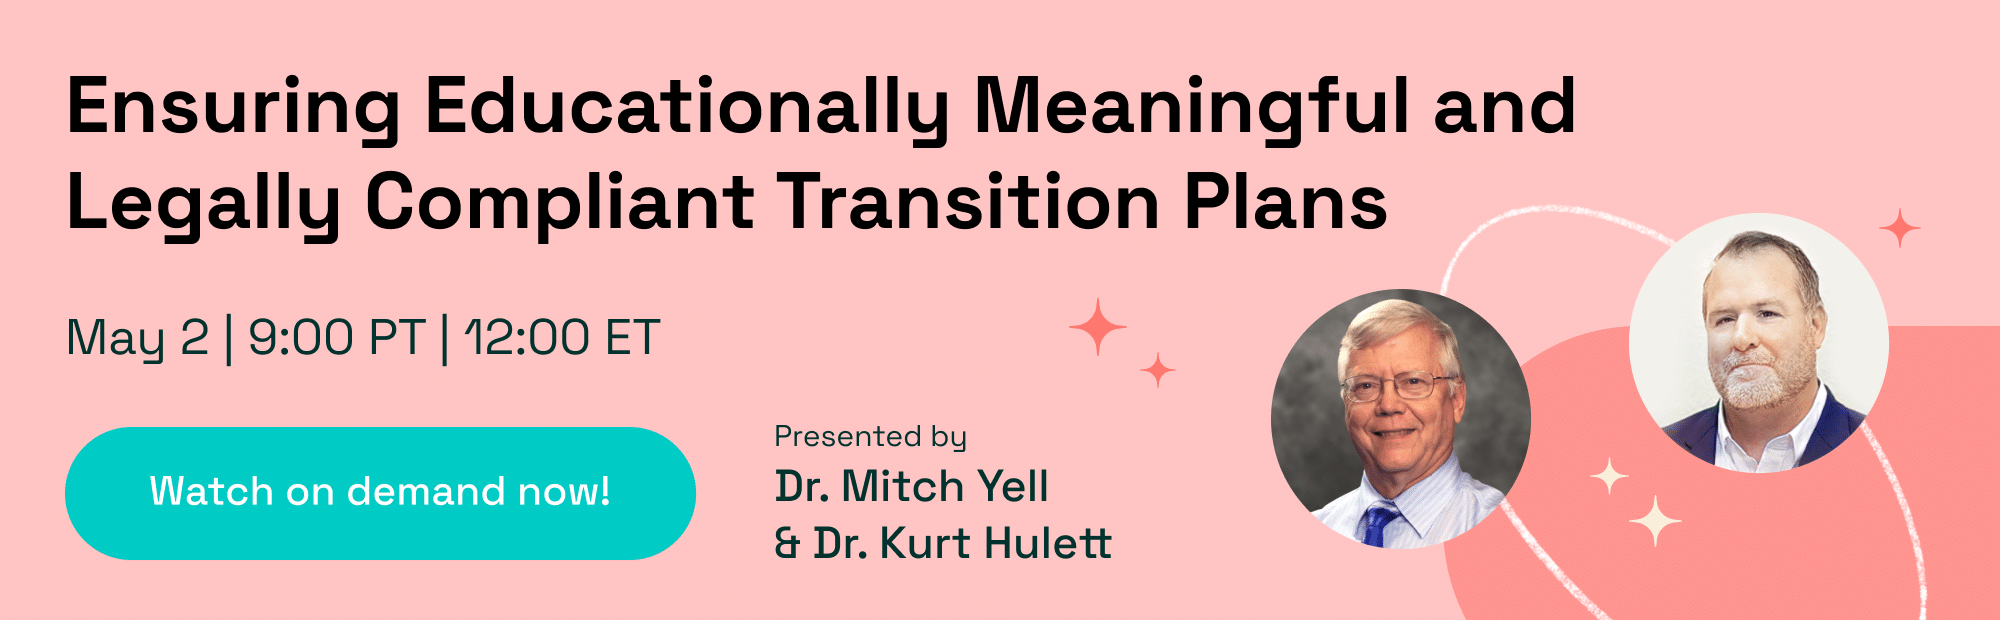 Ensuring Educationally Meaningful and Legally Compliant Transition Plans - webinar title on a salmon pink background with headshots of Dr. Yell and Dr. Hulett.